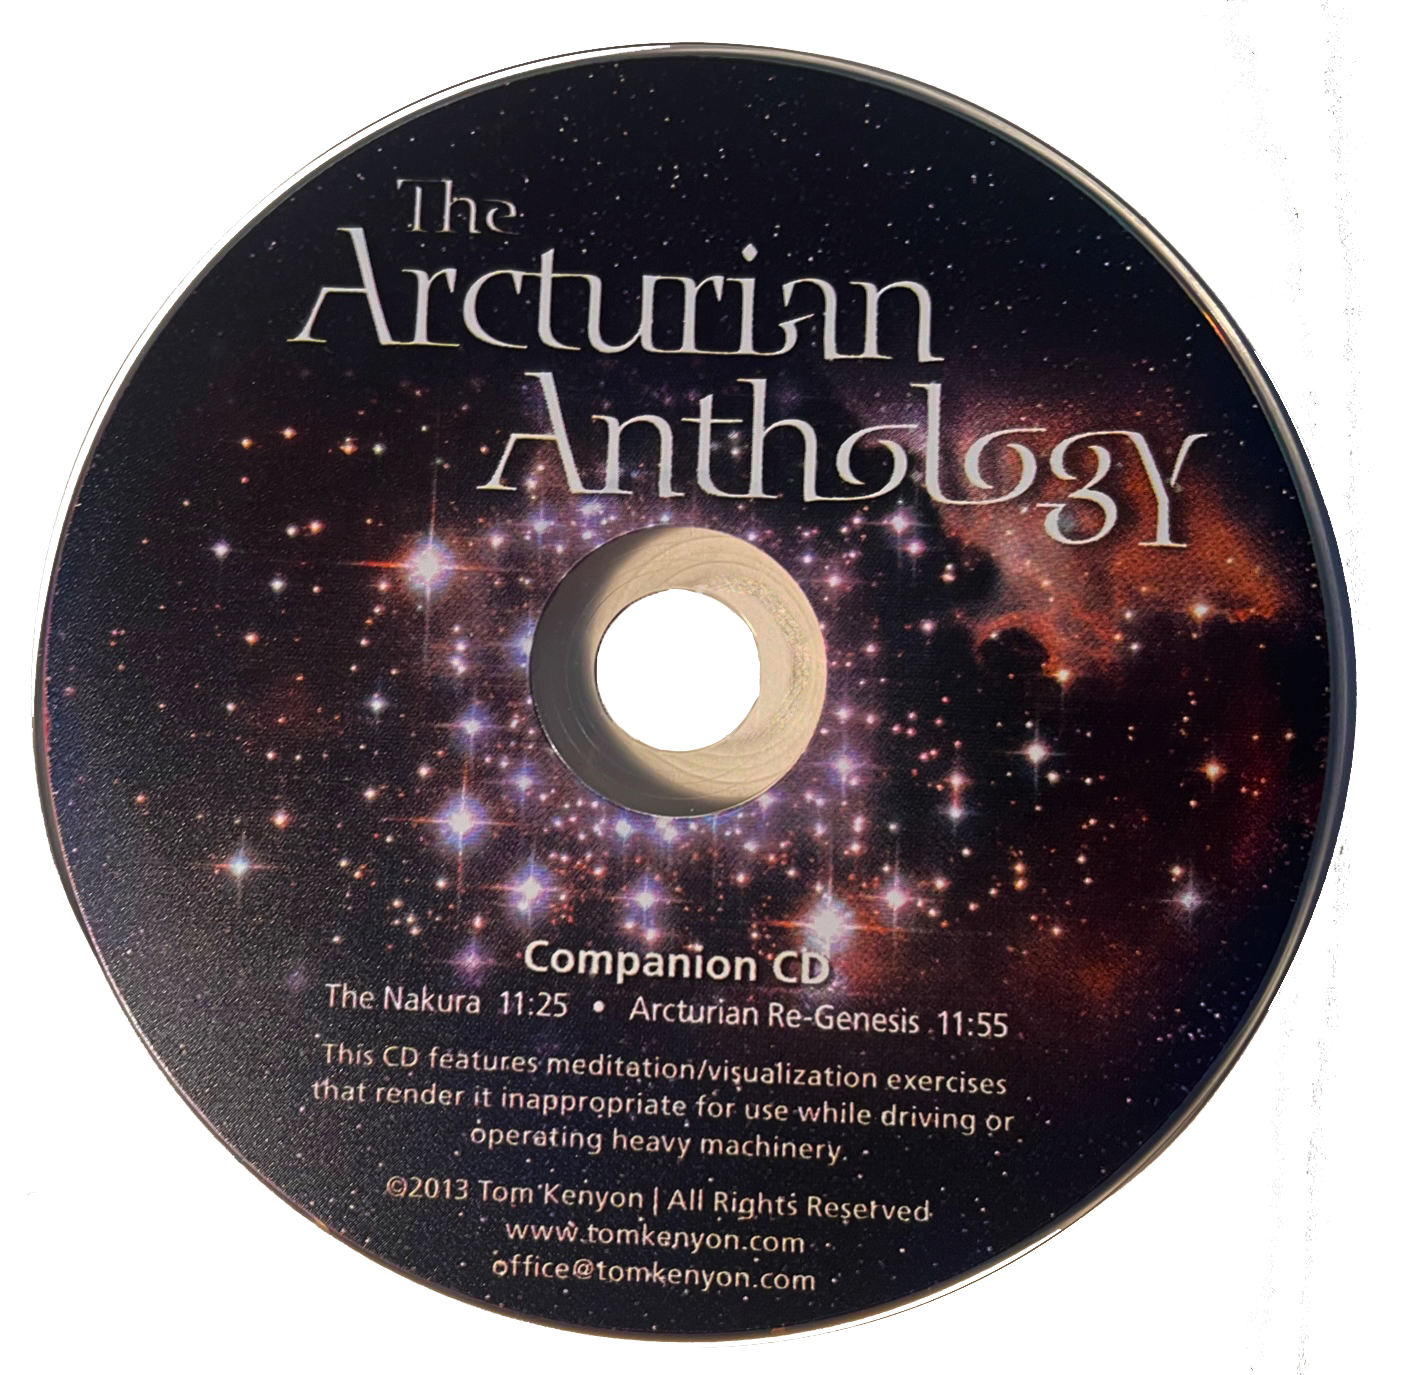 Arcturian Anthology MP3s